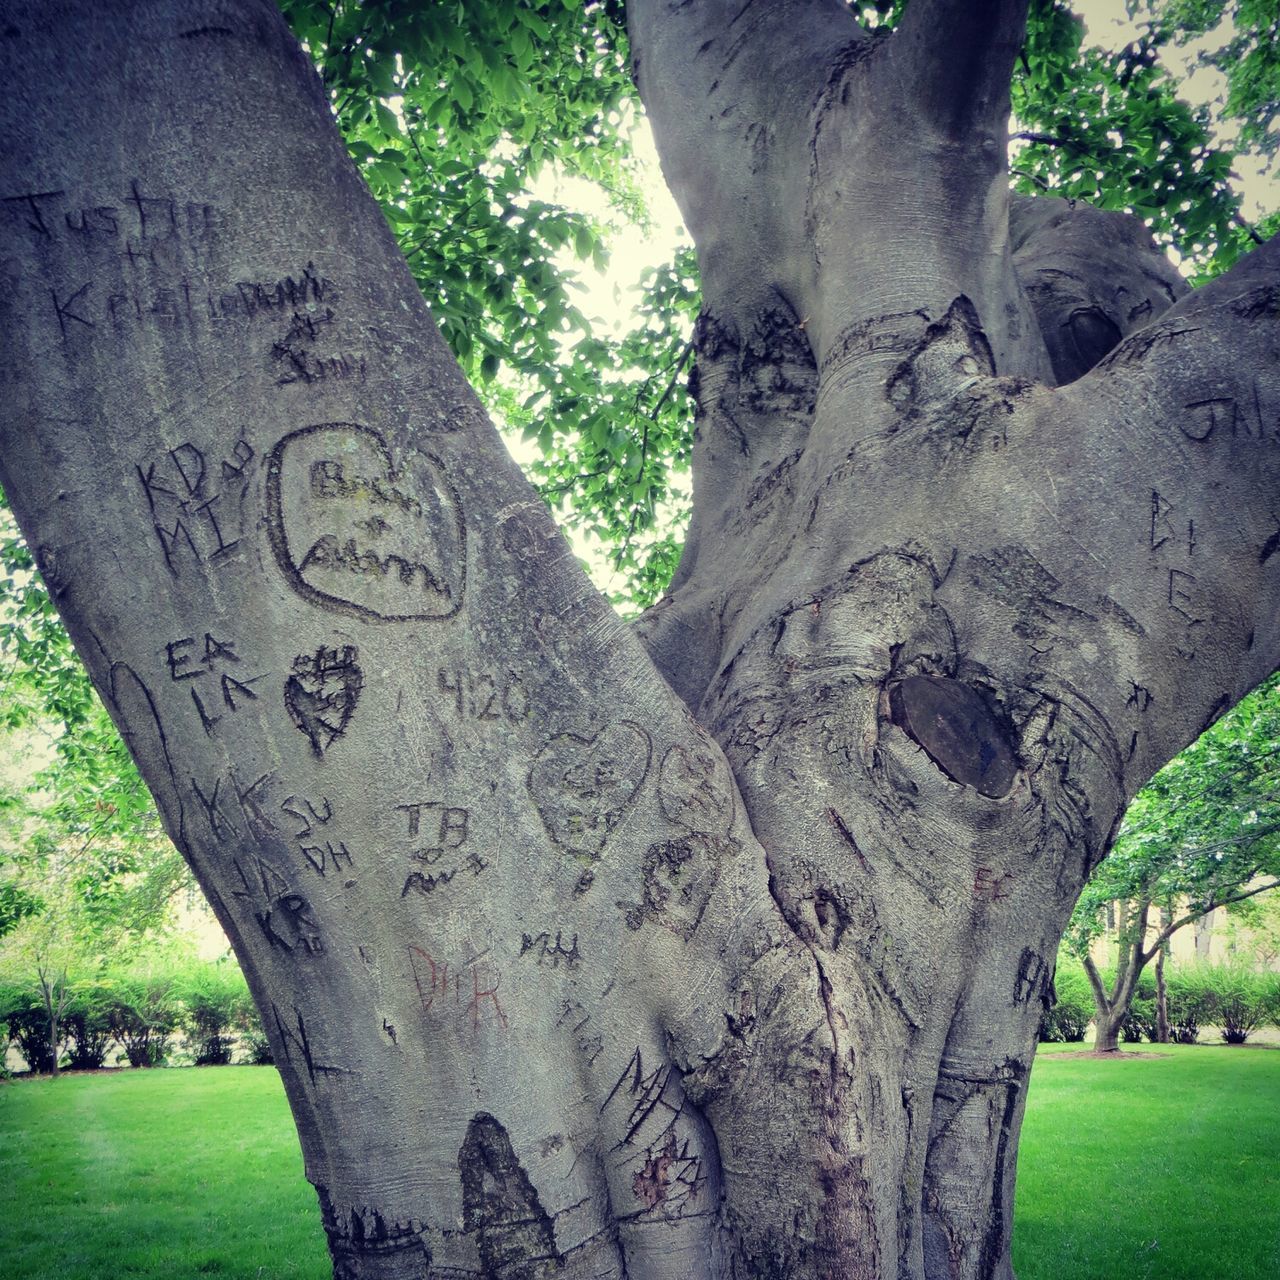 tree, tree trunk, grass, text, focus on foreground, nature, growth, day, green color, close-up, tranquility, outdoors, branch, western script, wood - material, no people, park - man made space, park, old, bark